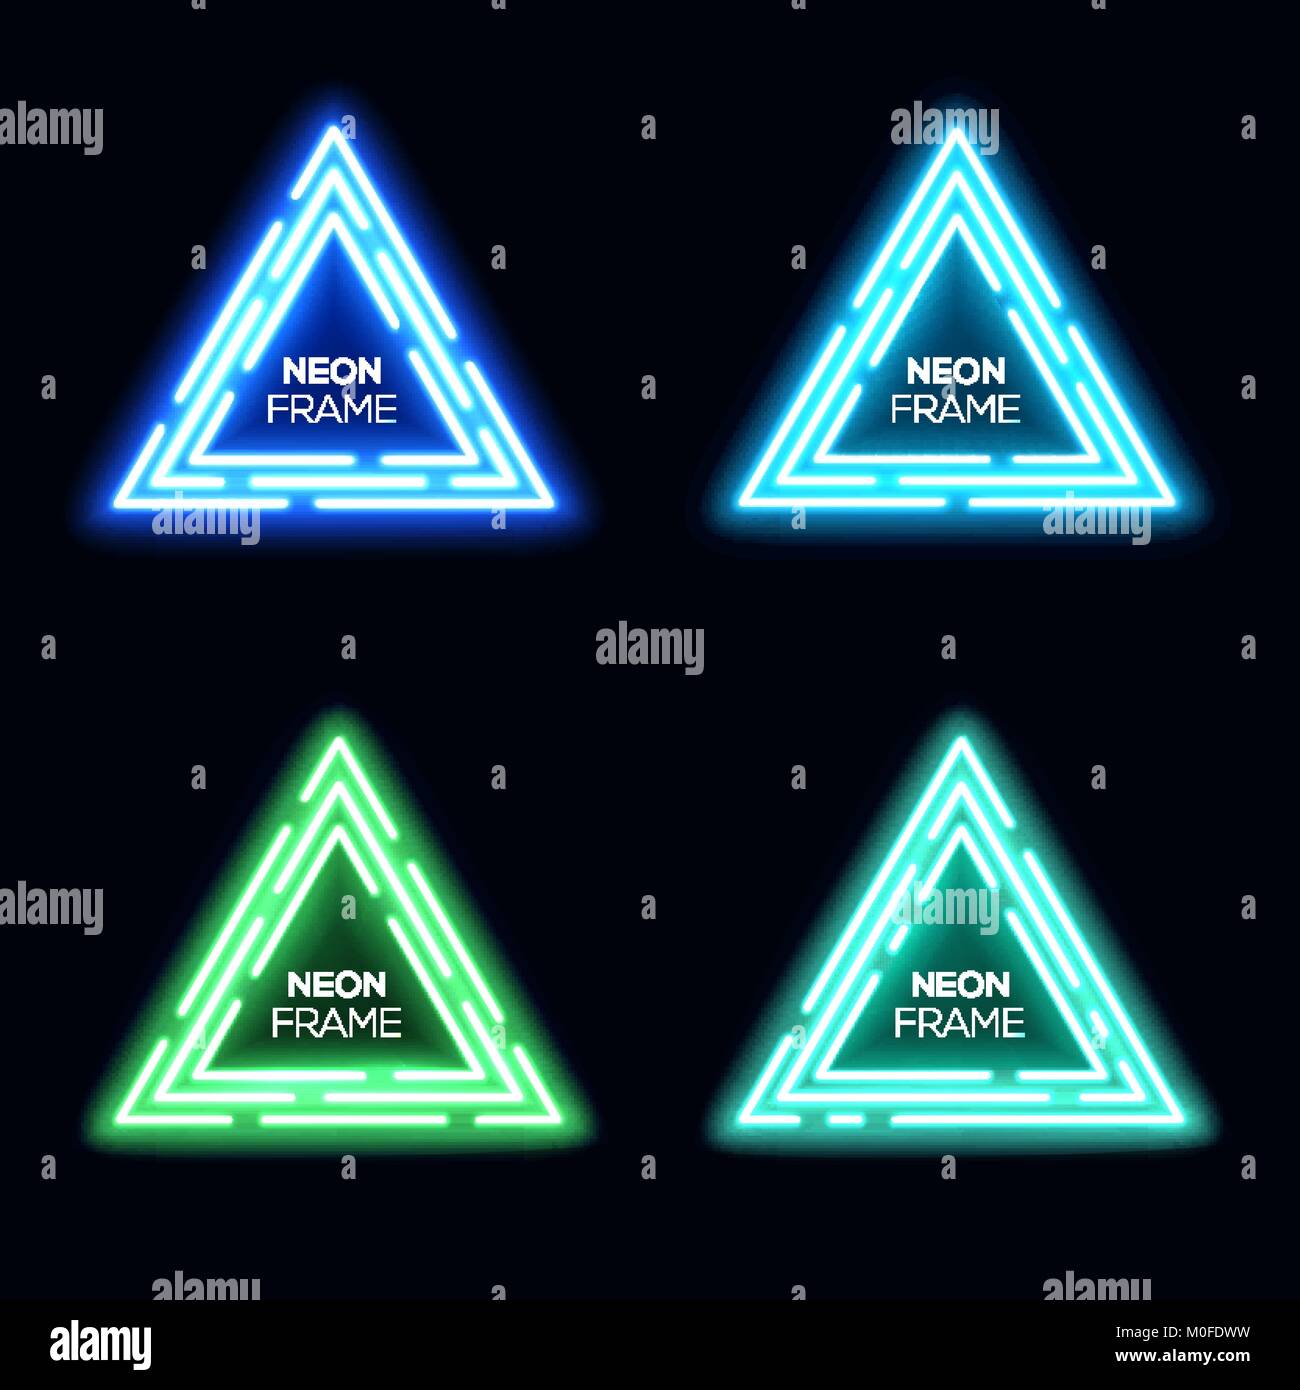 Neon light triangles set. Shining techno frame collection. Night club electric bright 3d banners design on dark blue backdrop. Neon abstract tech background with glow. Technology vector illustration. Stock Vector